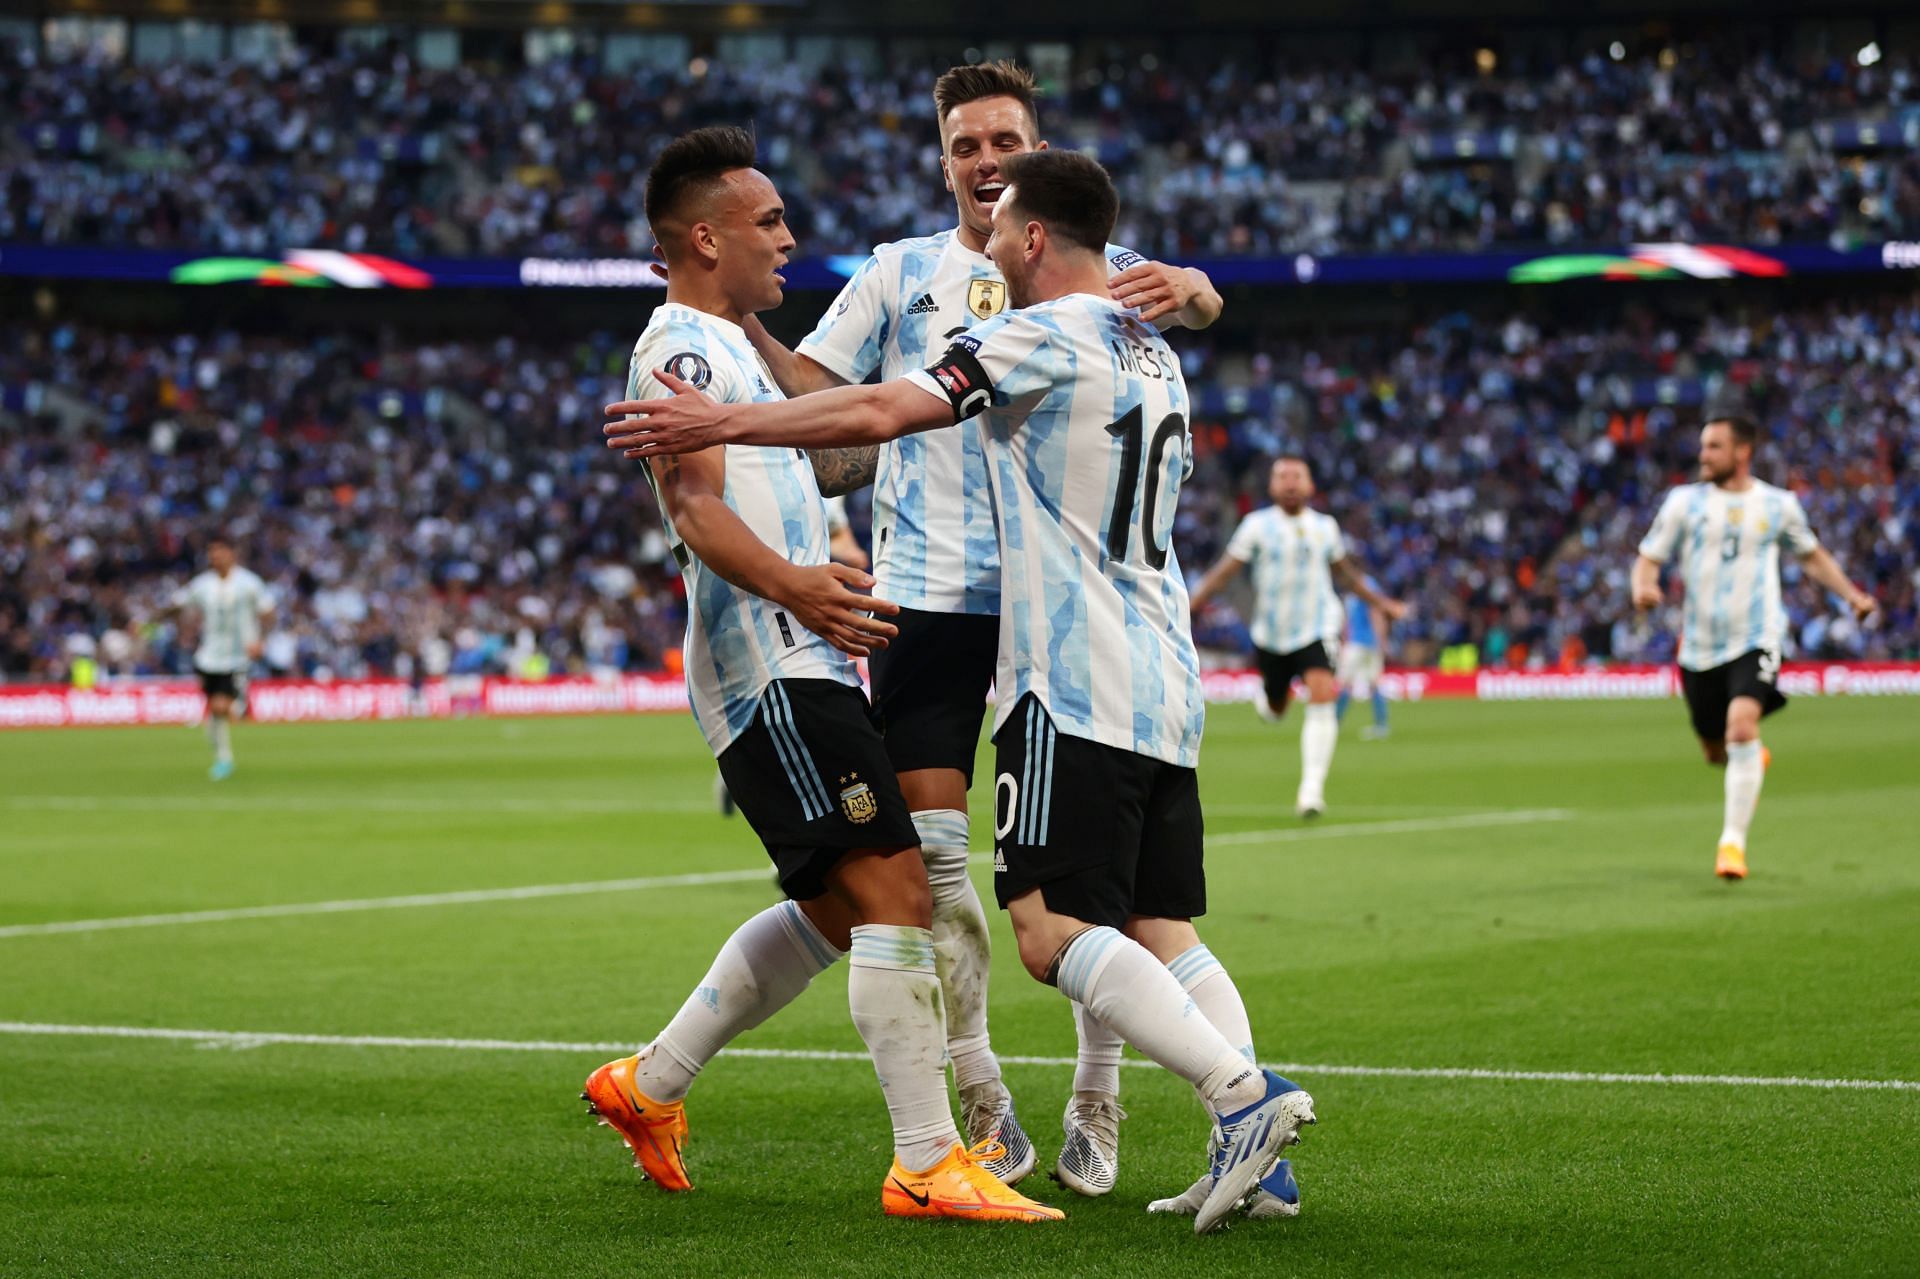 Lionel Messi and Lautaro Martinez will need to step up against Mexico